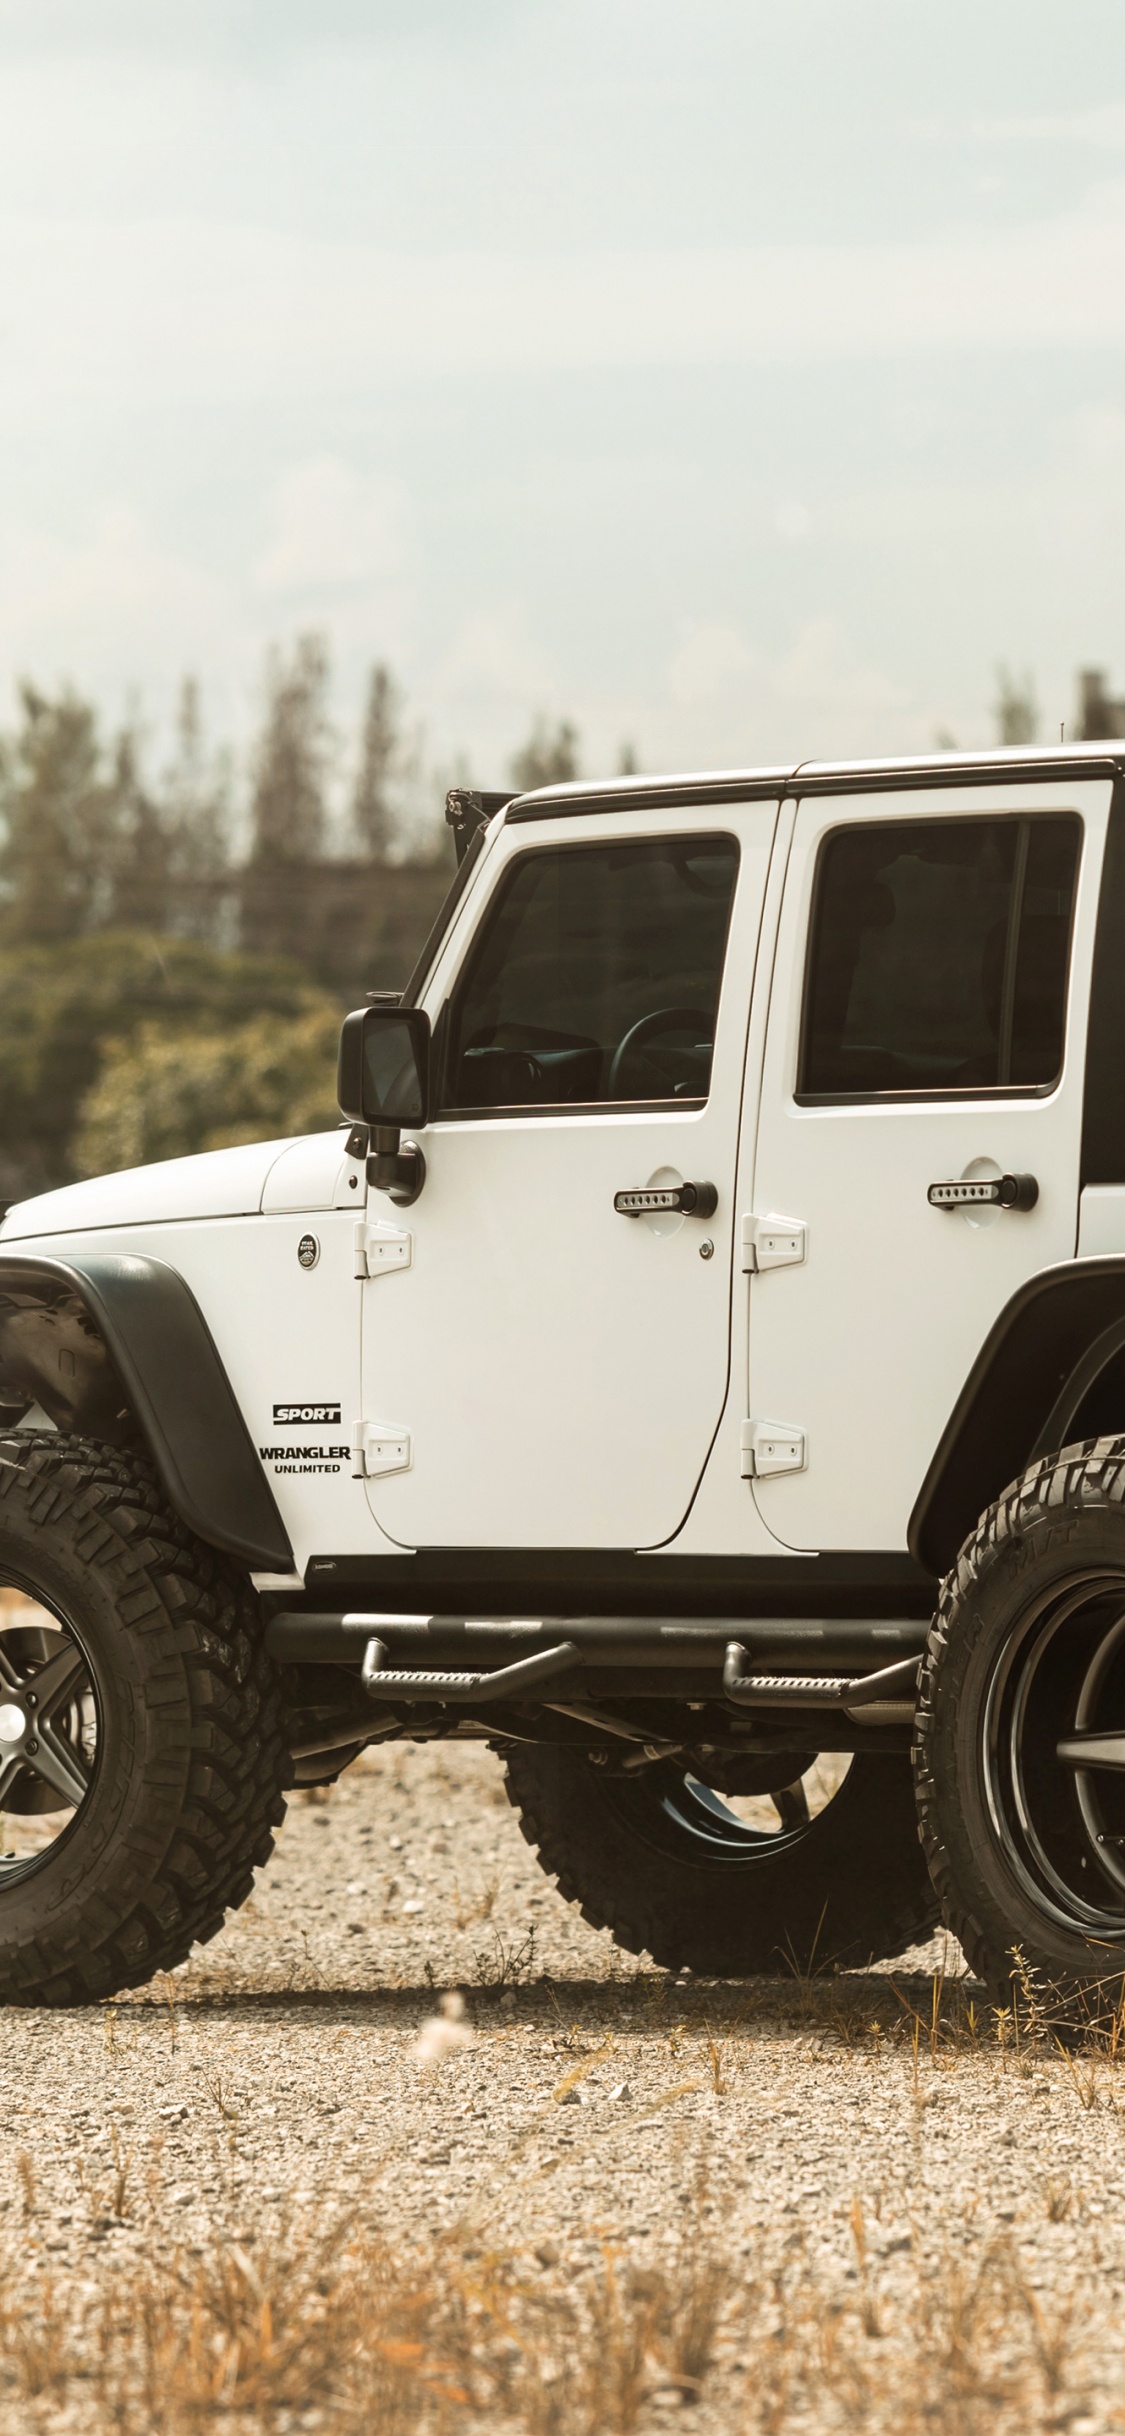 White and Black Jeep Wrangler on Brown Field During Daytime. Wallpaper in 1125x2436 Resolution